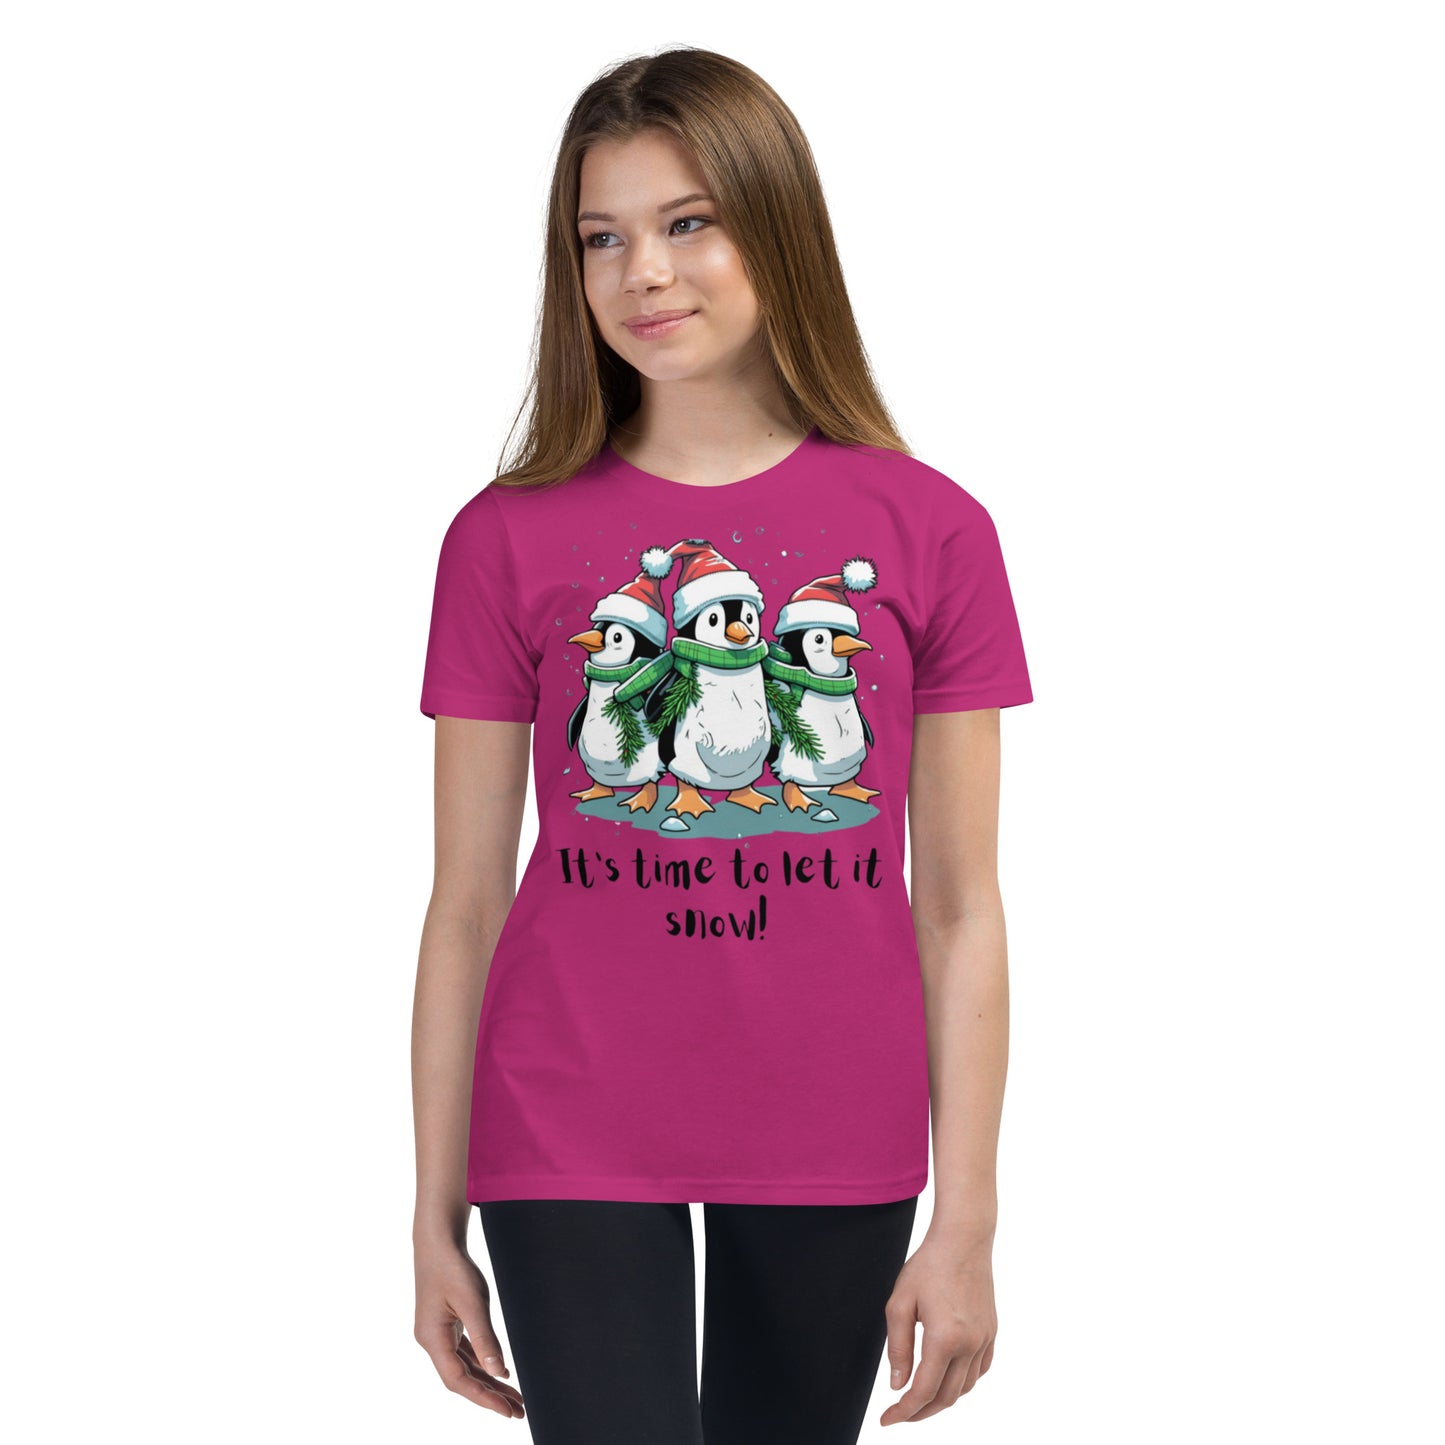 Let it snow Youth Short Sleeve T-Shirt